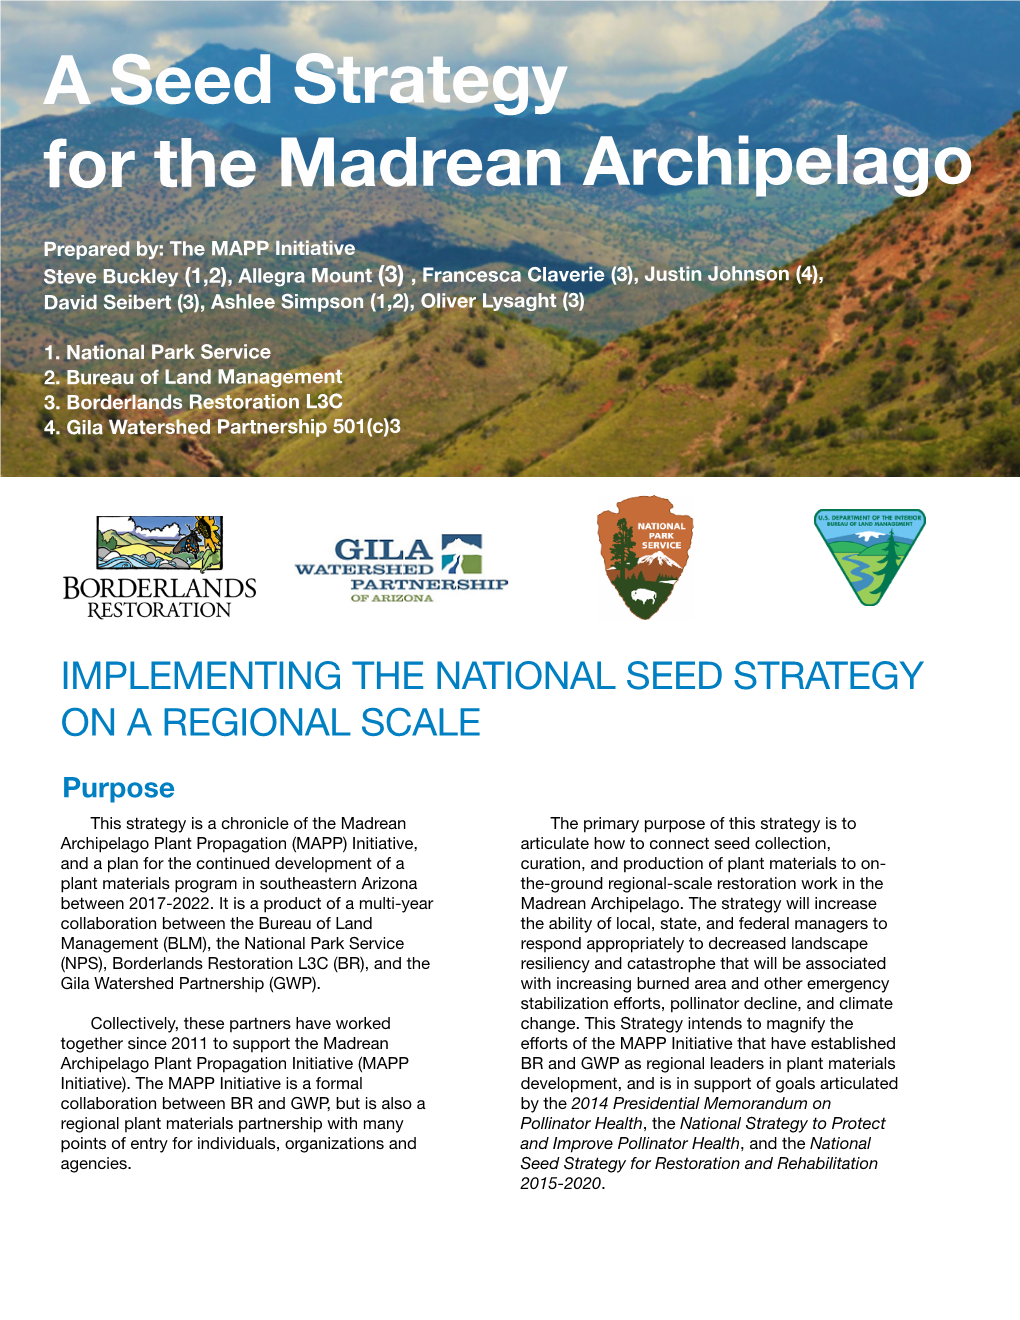 A Seed Strategy for the Madrean Archipelago